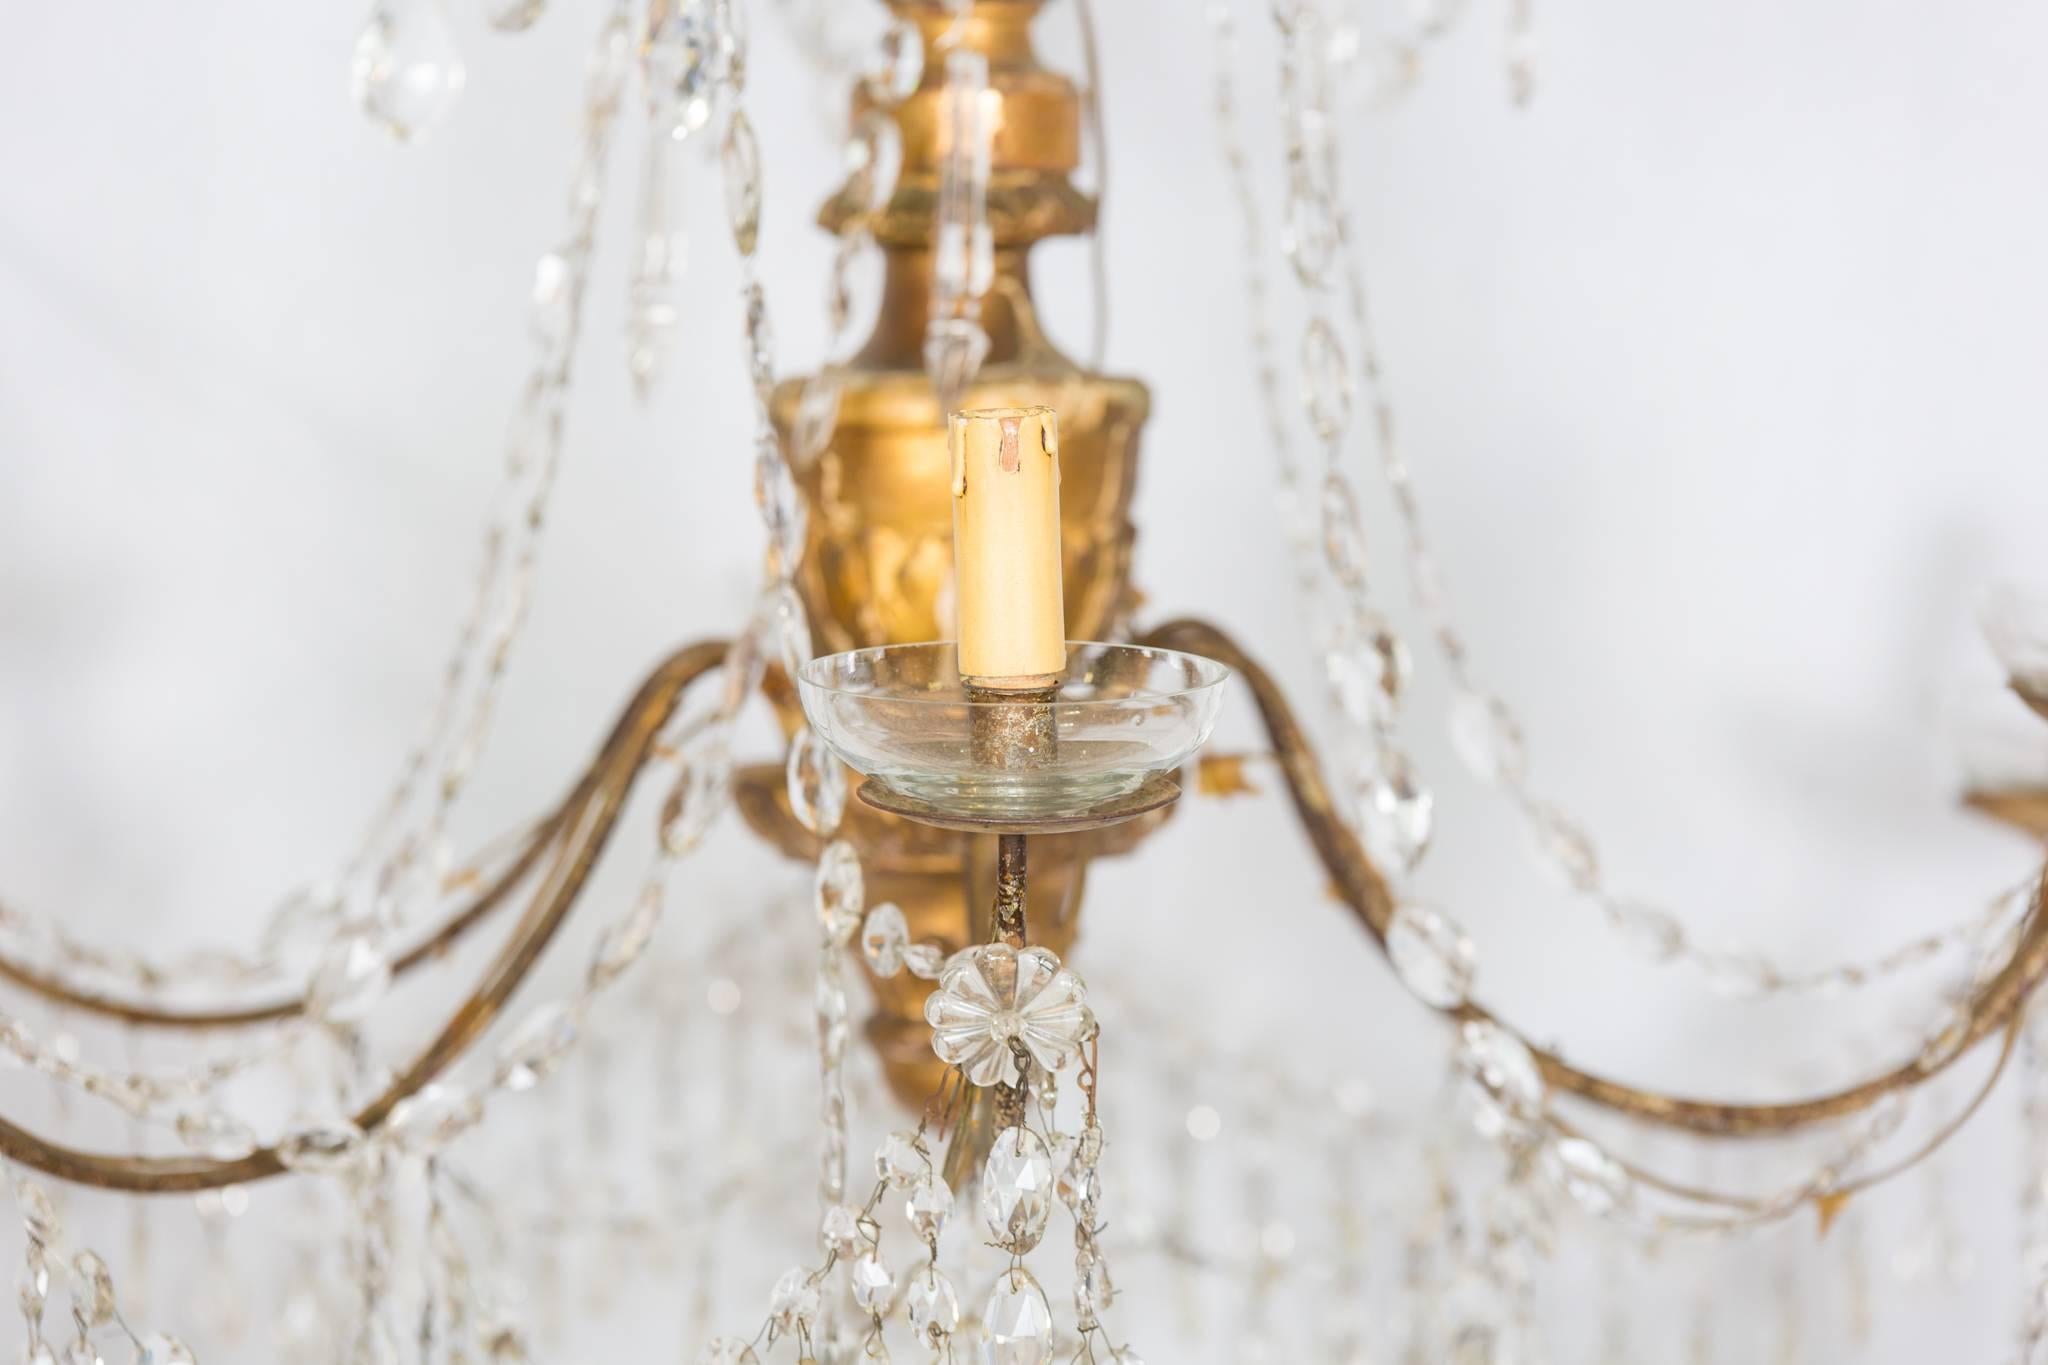 18th Century Italian Gilt and Crystal Chandelier. Dramatic six-light gilded wood chandelier from Genoa, Italy. Beautiful antique crystal and iron detail with crystal rosettes. 